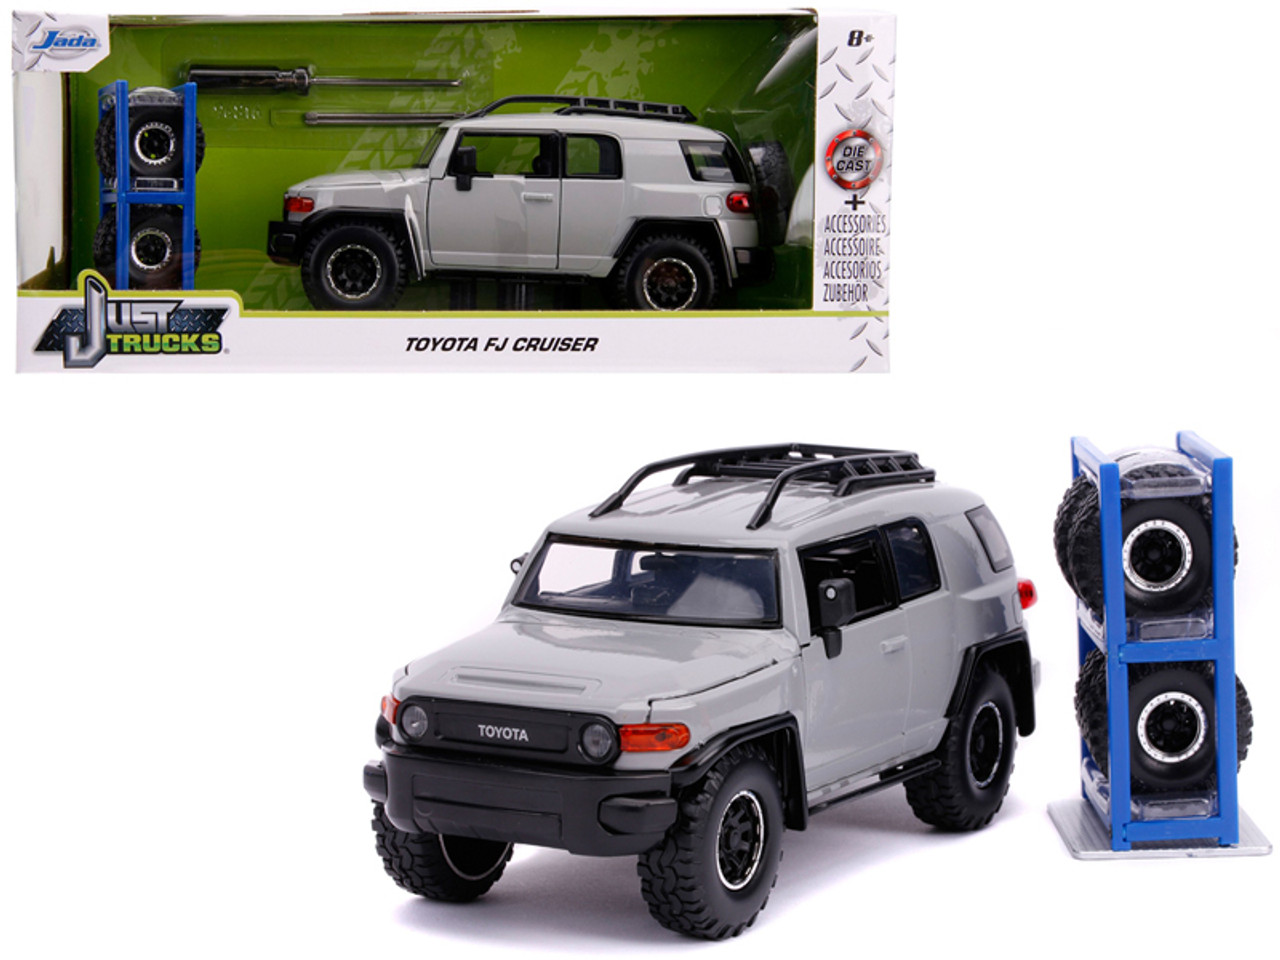 Toyota FJ Cruiser with Roof Rack Gray with Extra Wheels "Just Trucks" Series 1/24 Diecast Model Car by Jada